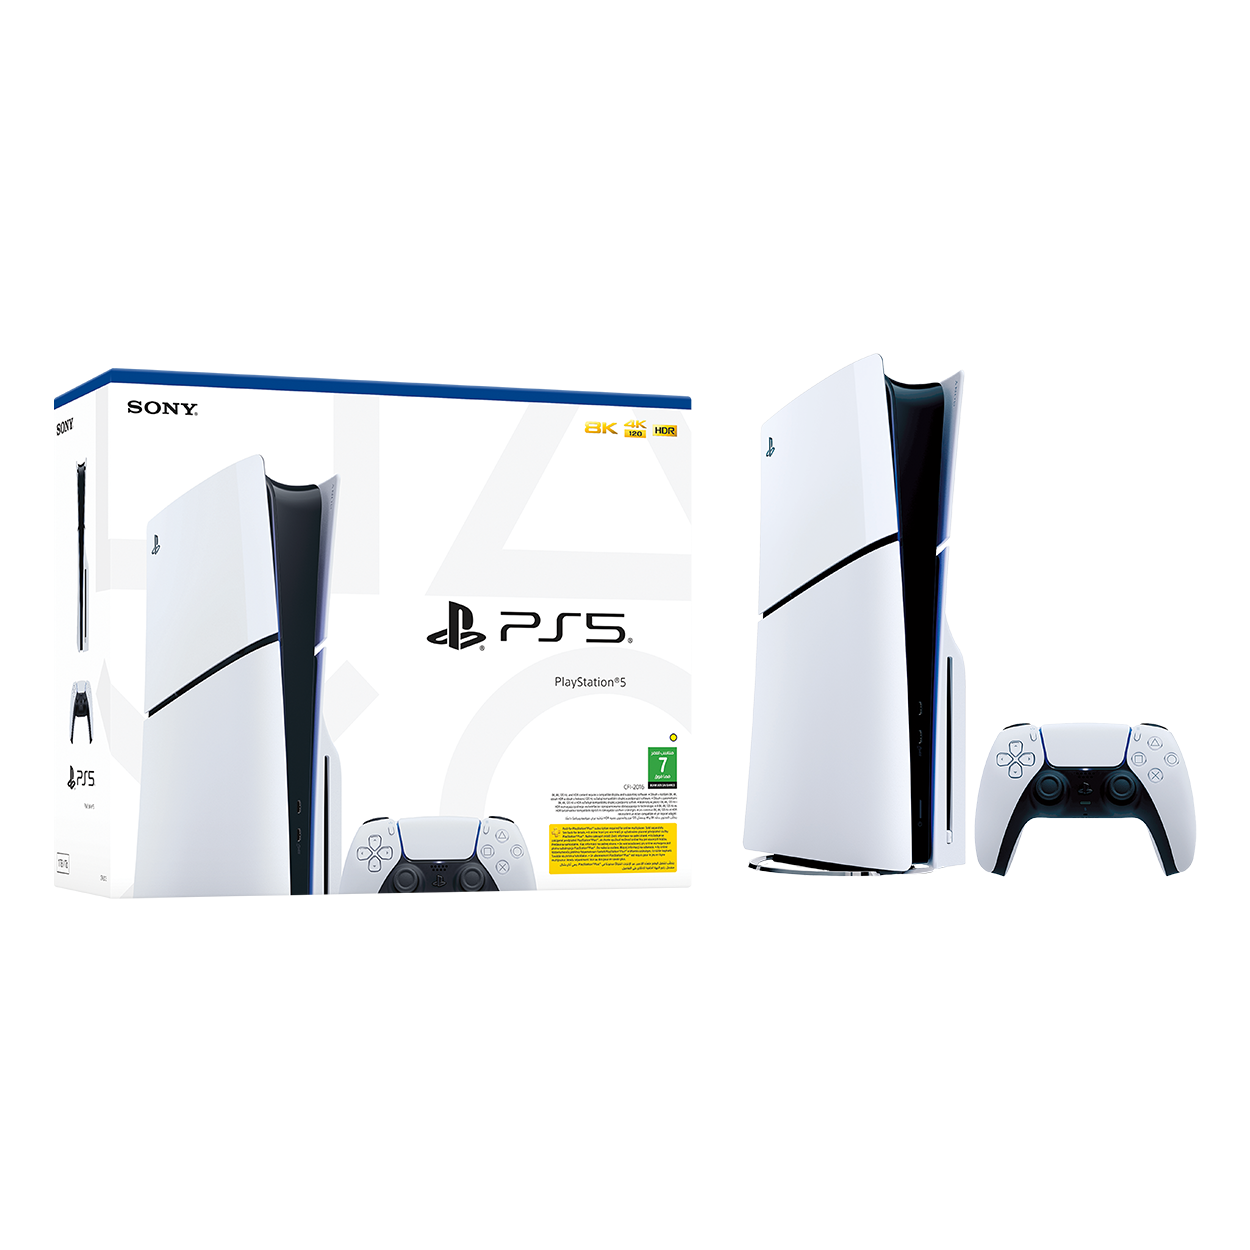 Buy SONY PLAYSTATION 5 STANDARD GOWR VCH BUNDLE PS5 HARDWARE At